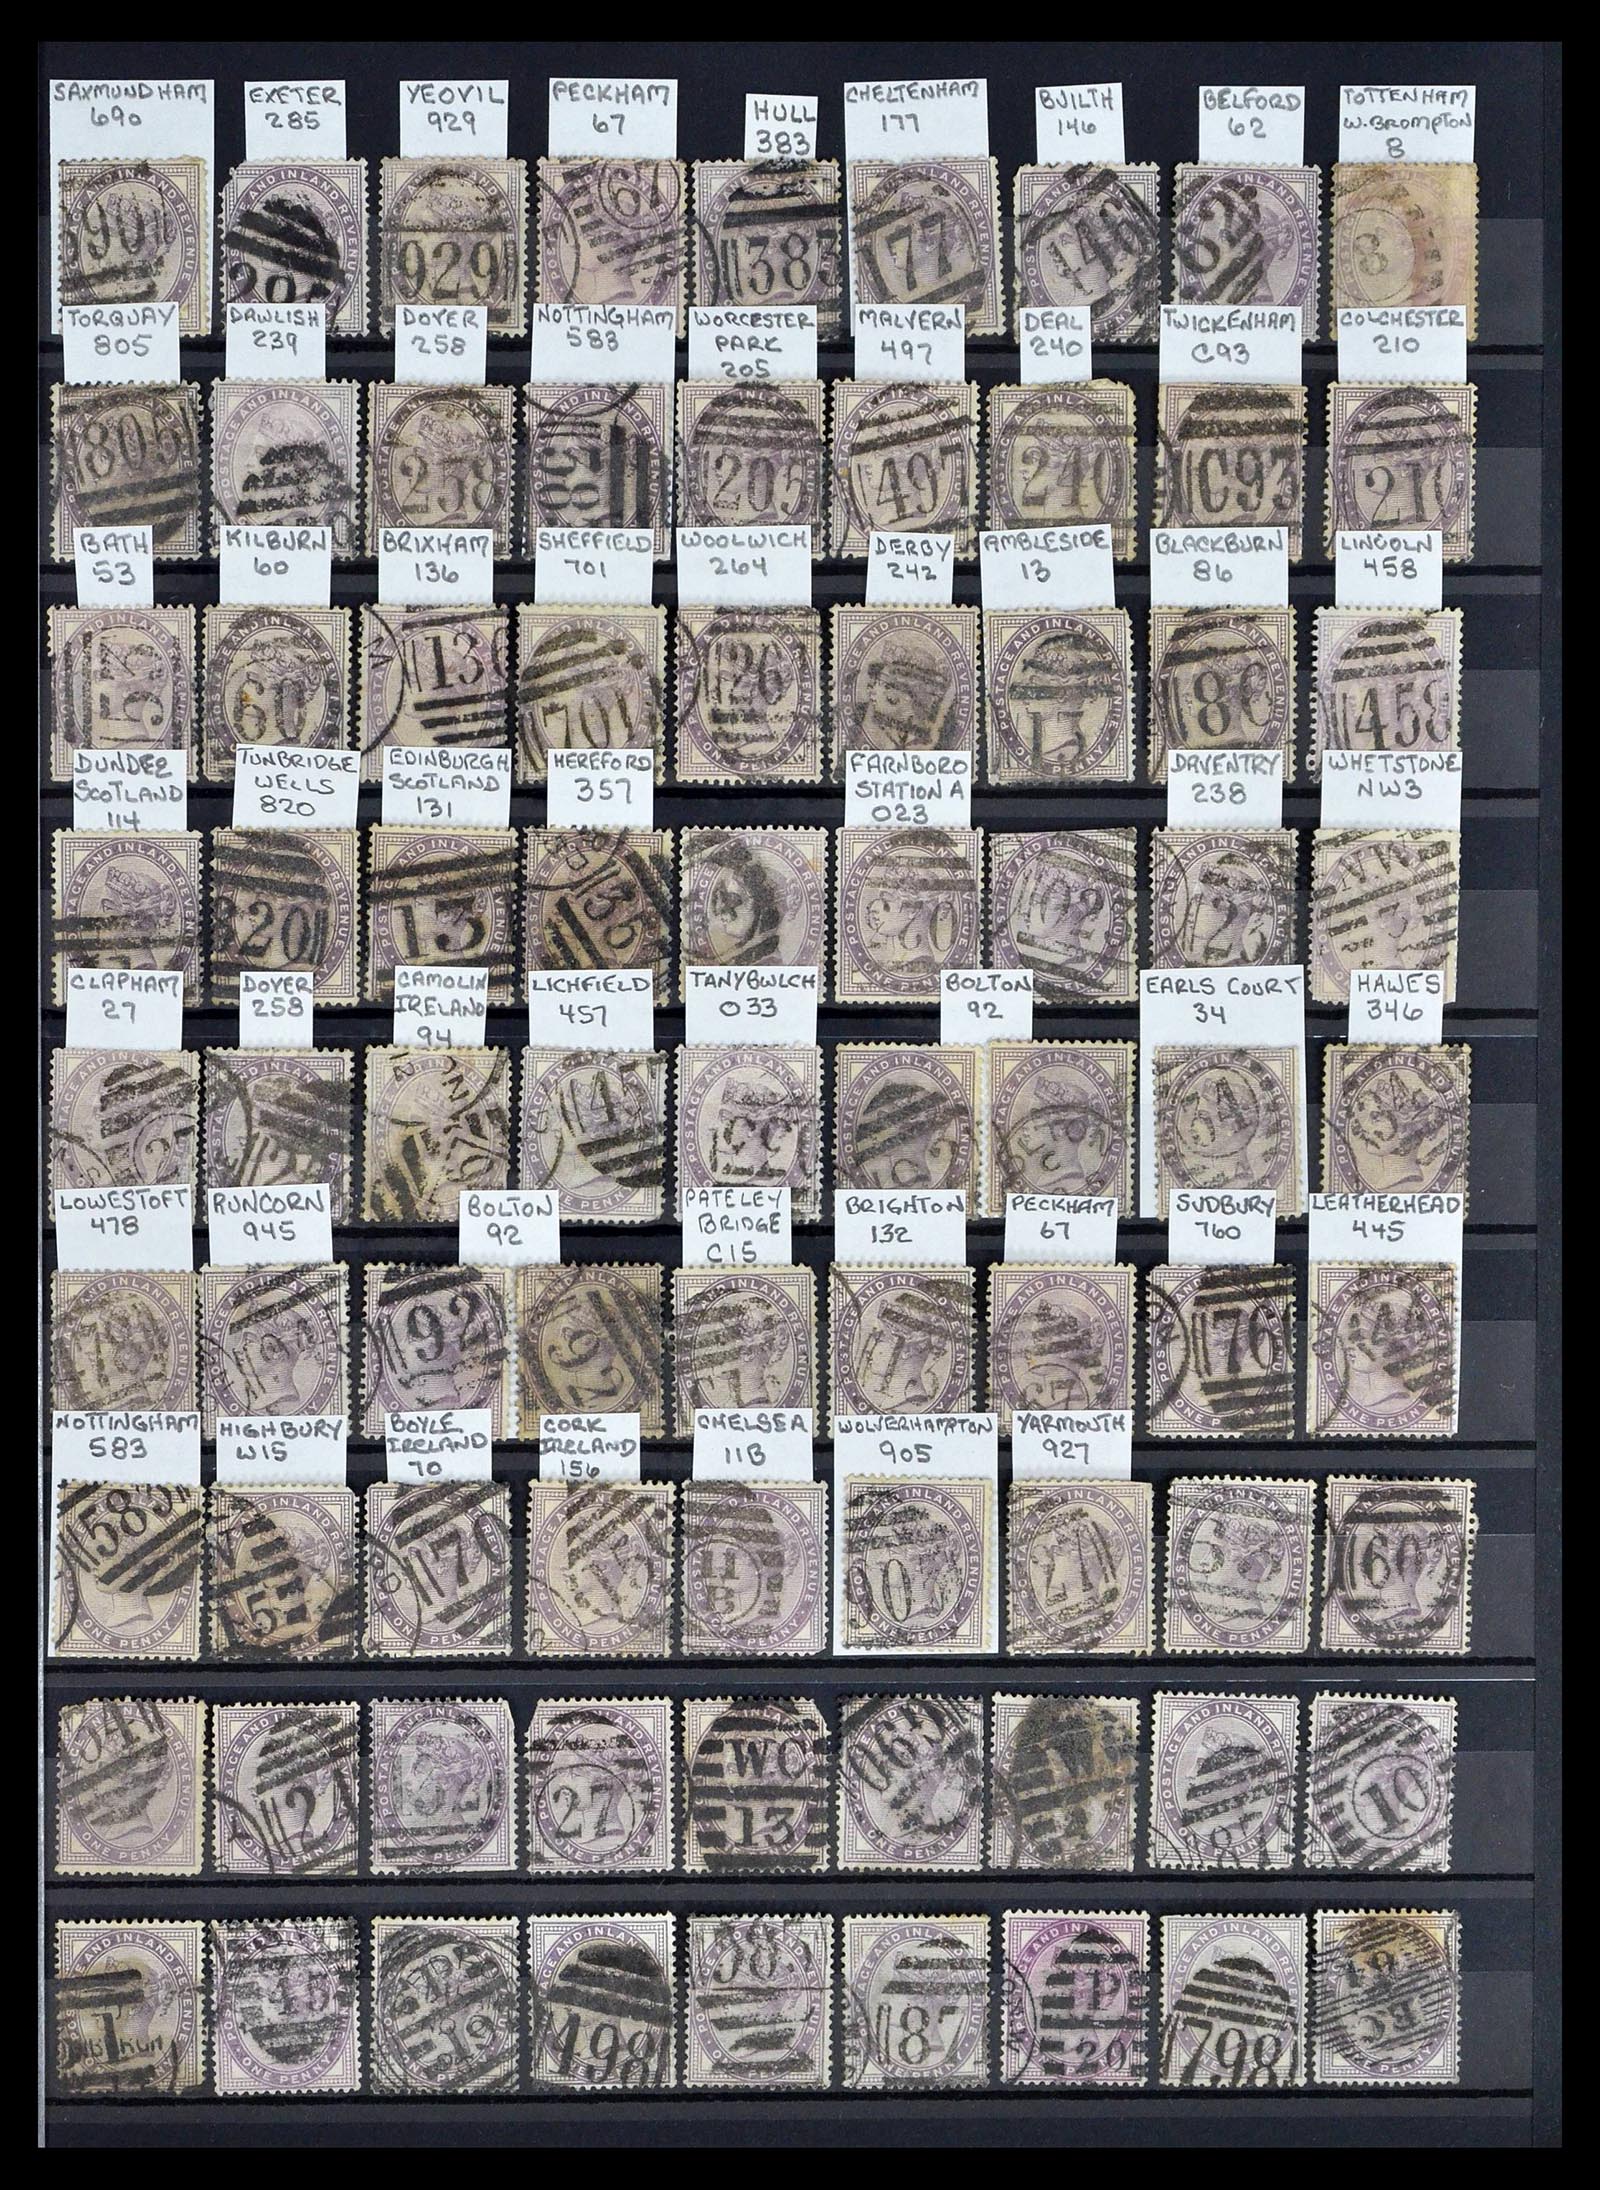 39196 0071 - Stamp collection 39196 Great Britain 1844-1955.